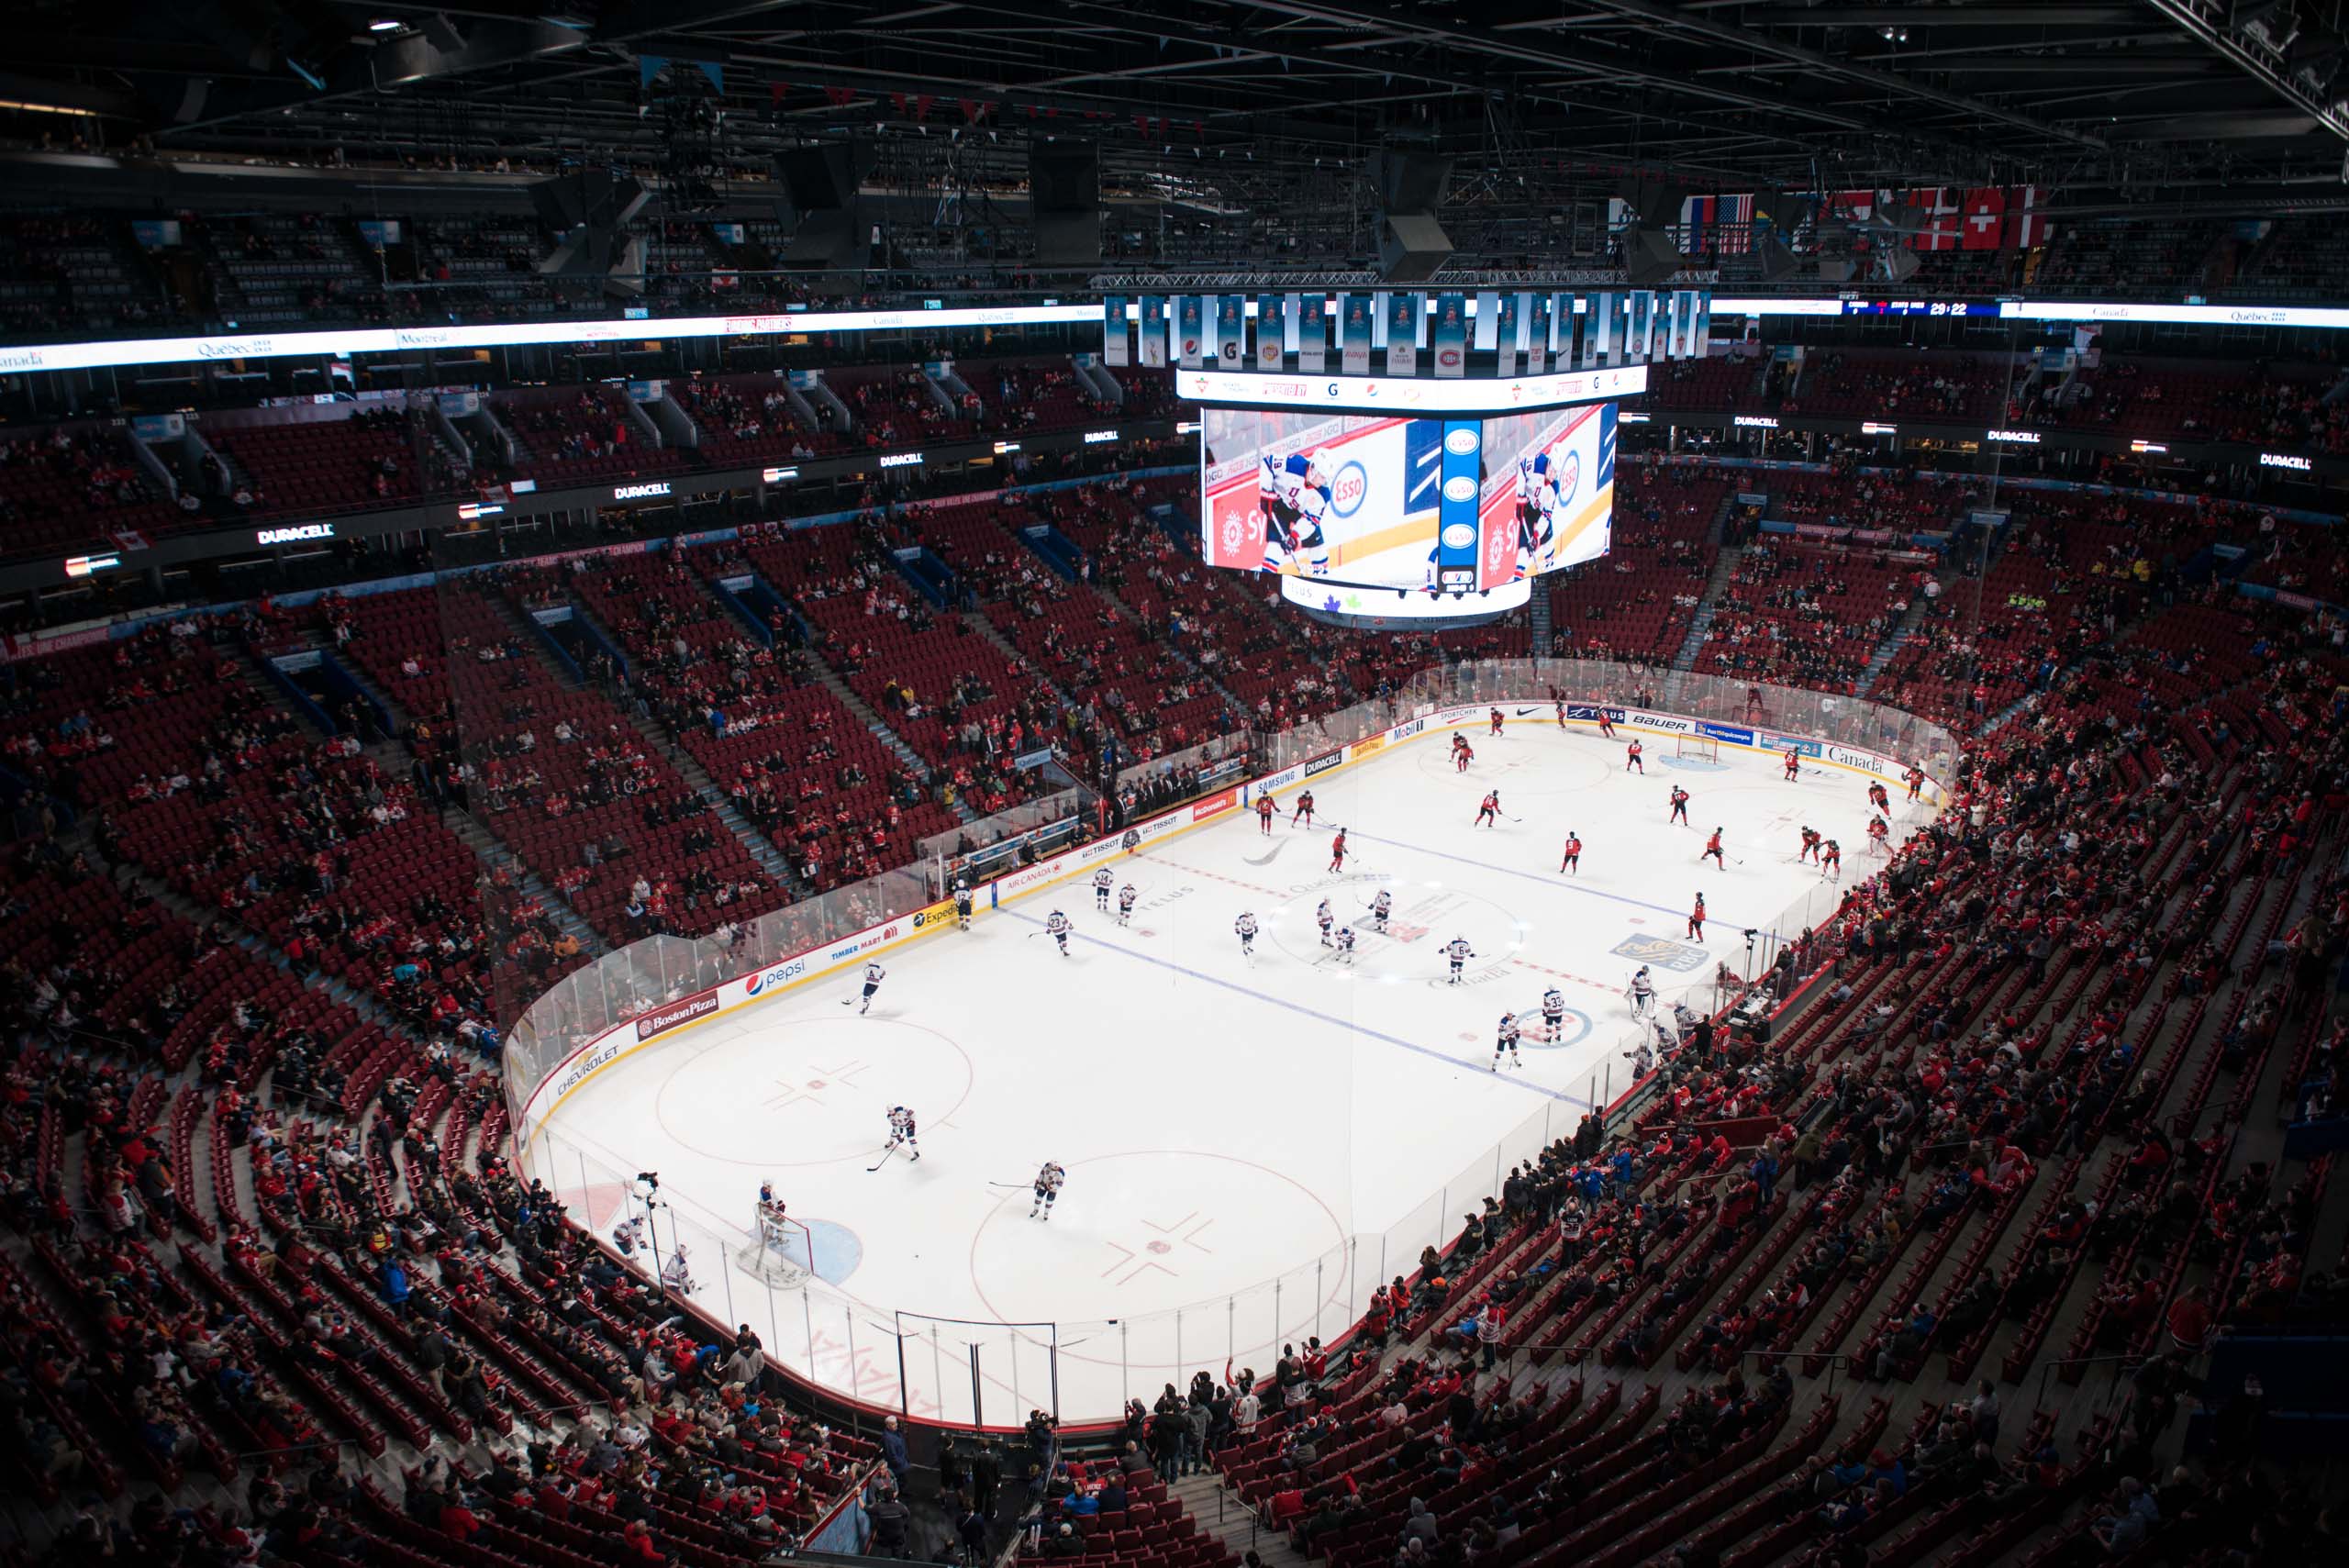 Much was made of the lack of attendance at the WJC in both Toronto and Montreal this year, but the gold medal game nearly packed the Bell Centre. Here, the stands begin to fill out in pre-game warmups. (Photo by Julien Grimard)